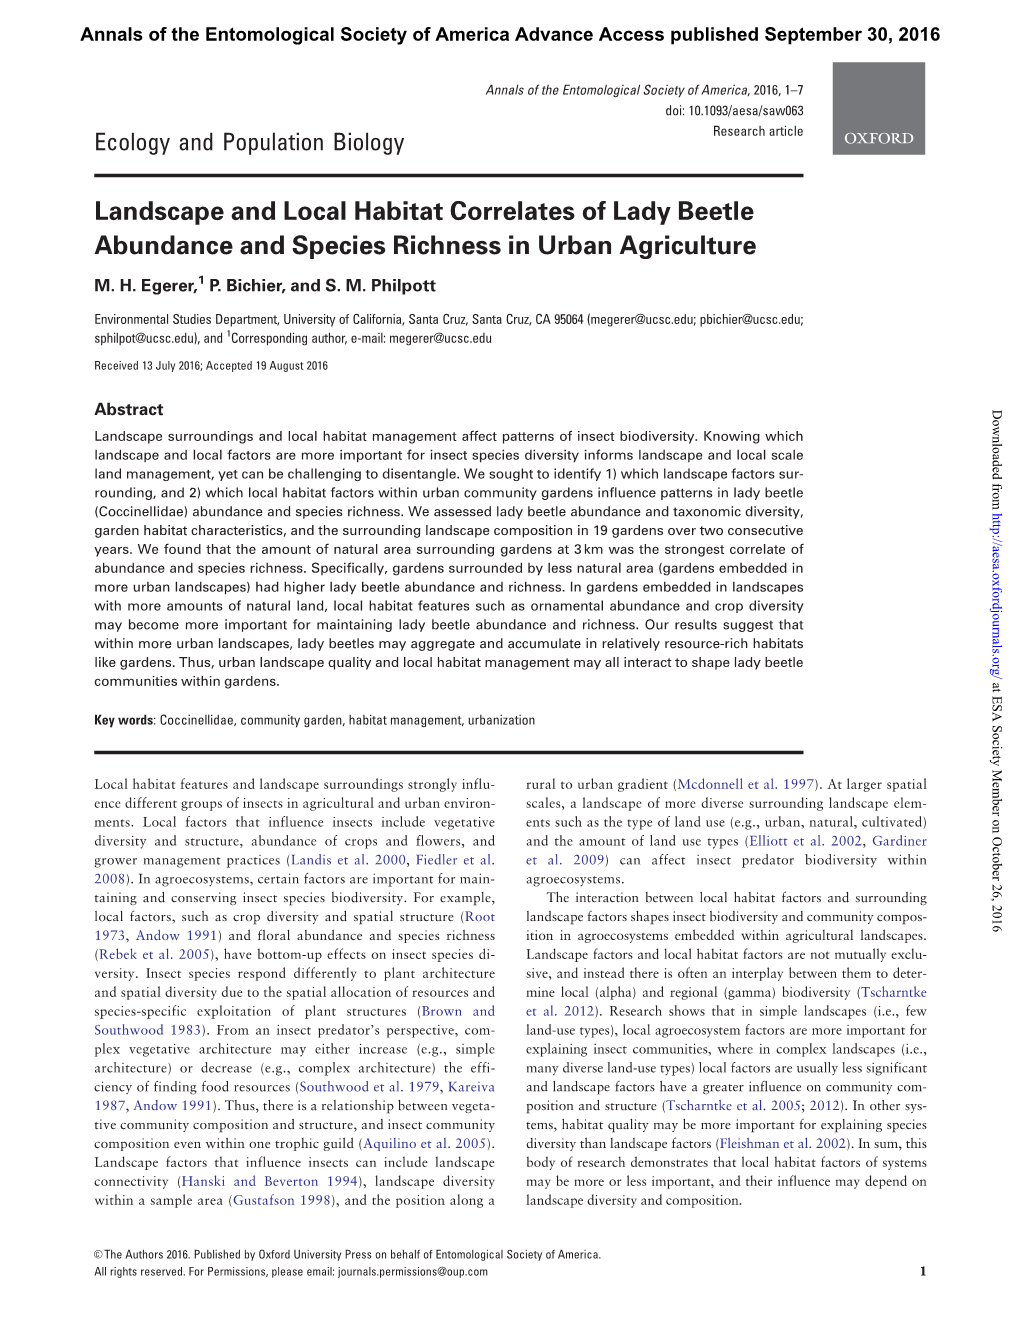 Landscape and Local Habitat Correlates of Lady Beetle Abundance and Species Richness in Urban Agriculture